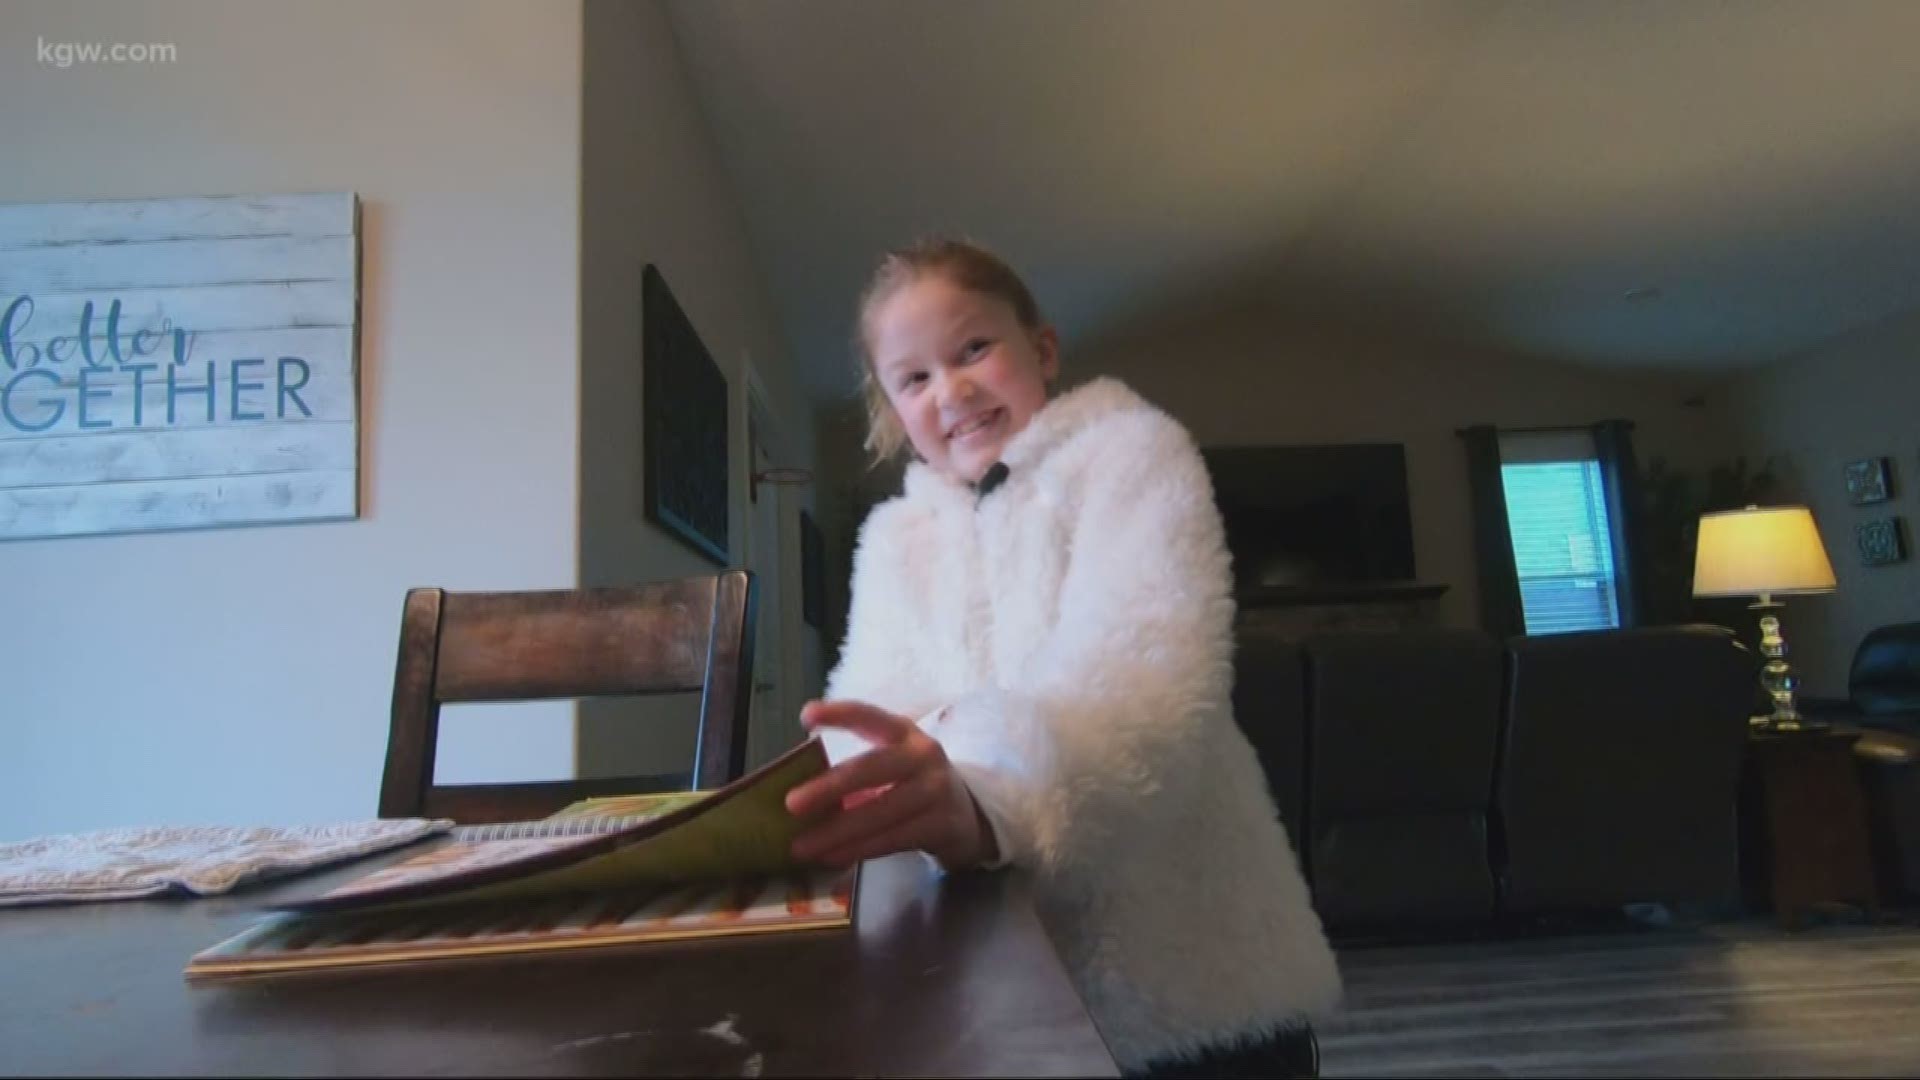 A Vancouver girl who was born deaf is looking to change the world. She has a cool idea that she hopes will become reality, and that idea won her a trip to Europe.